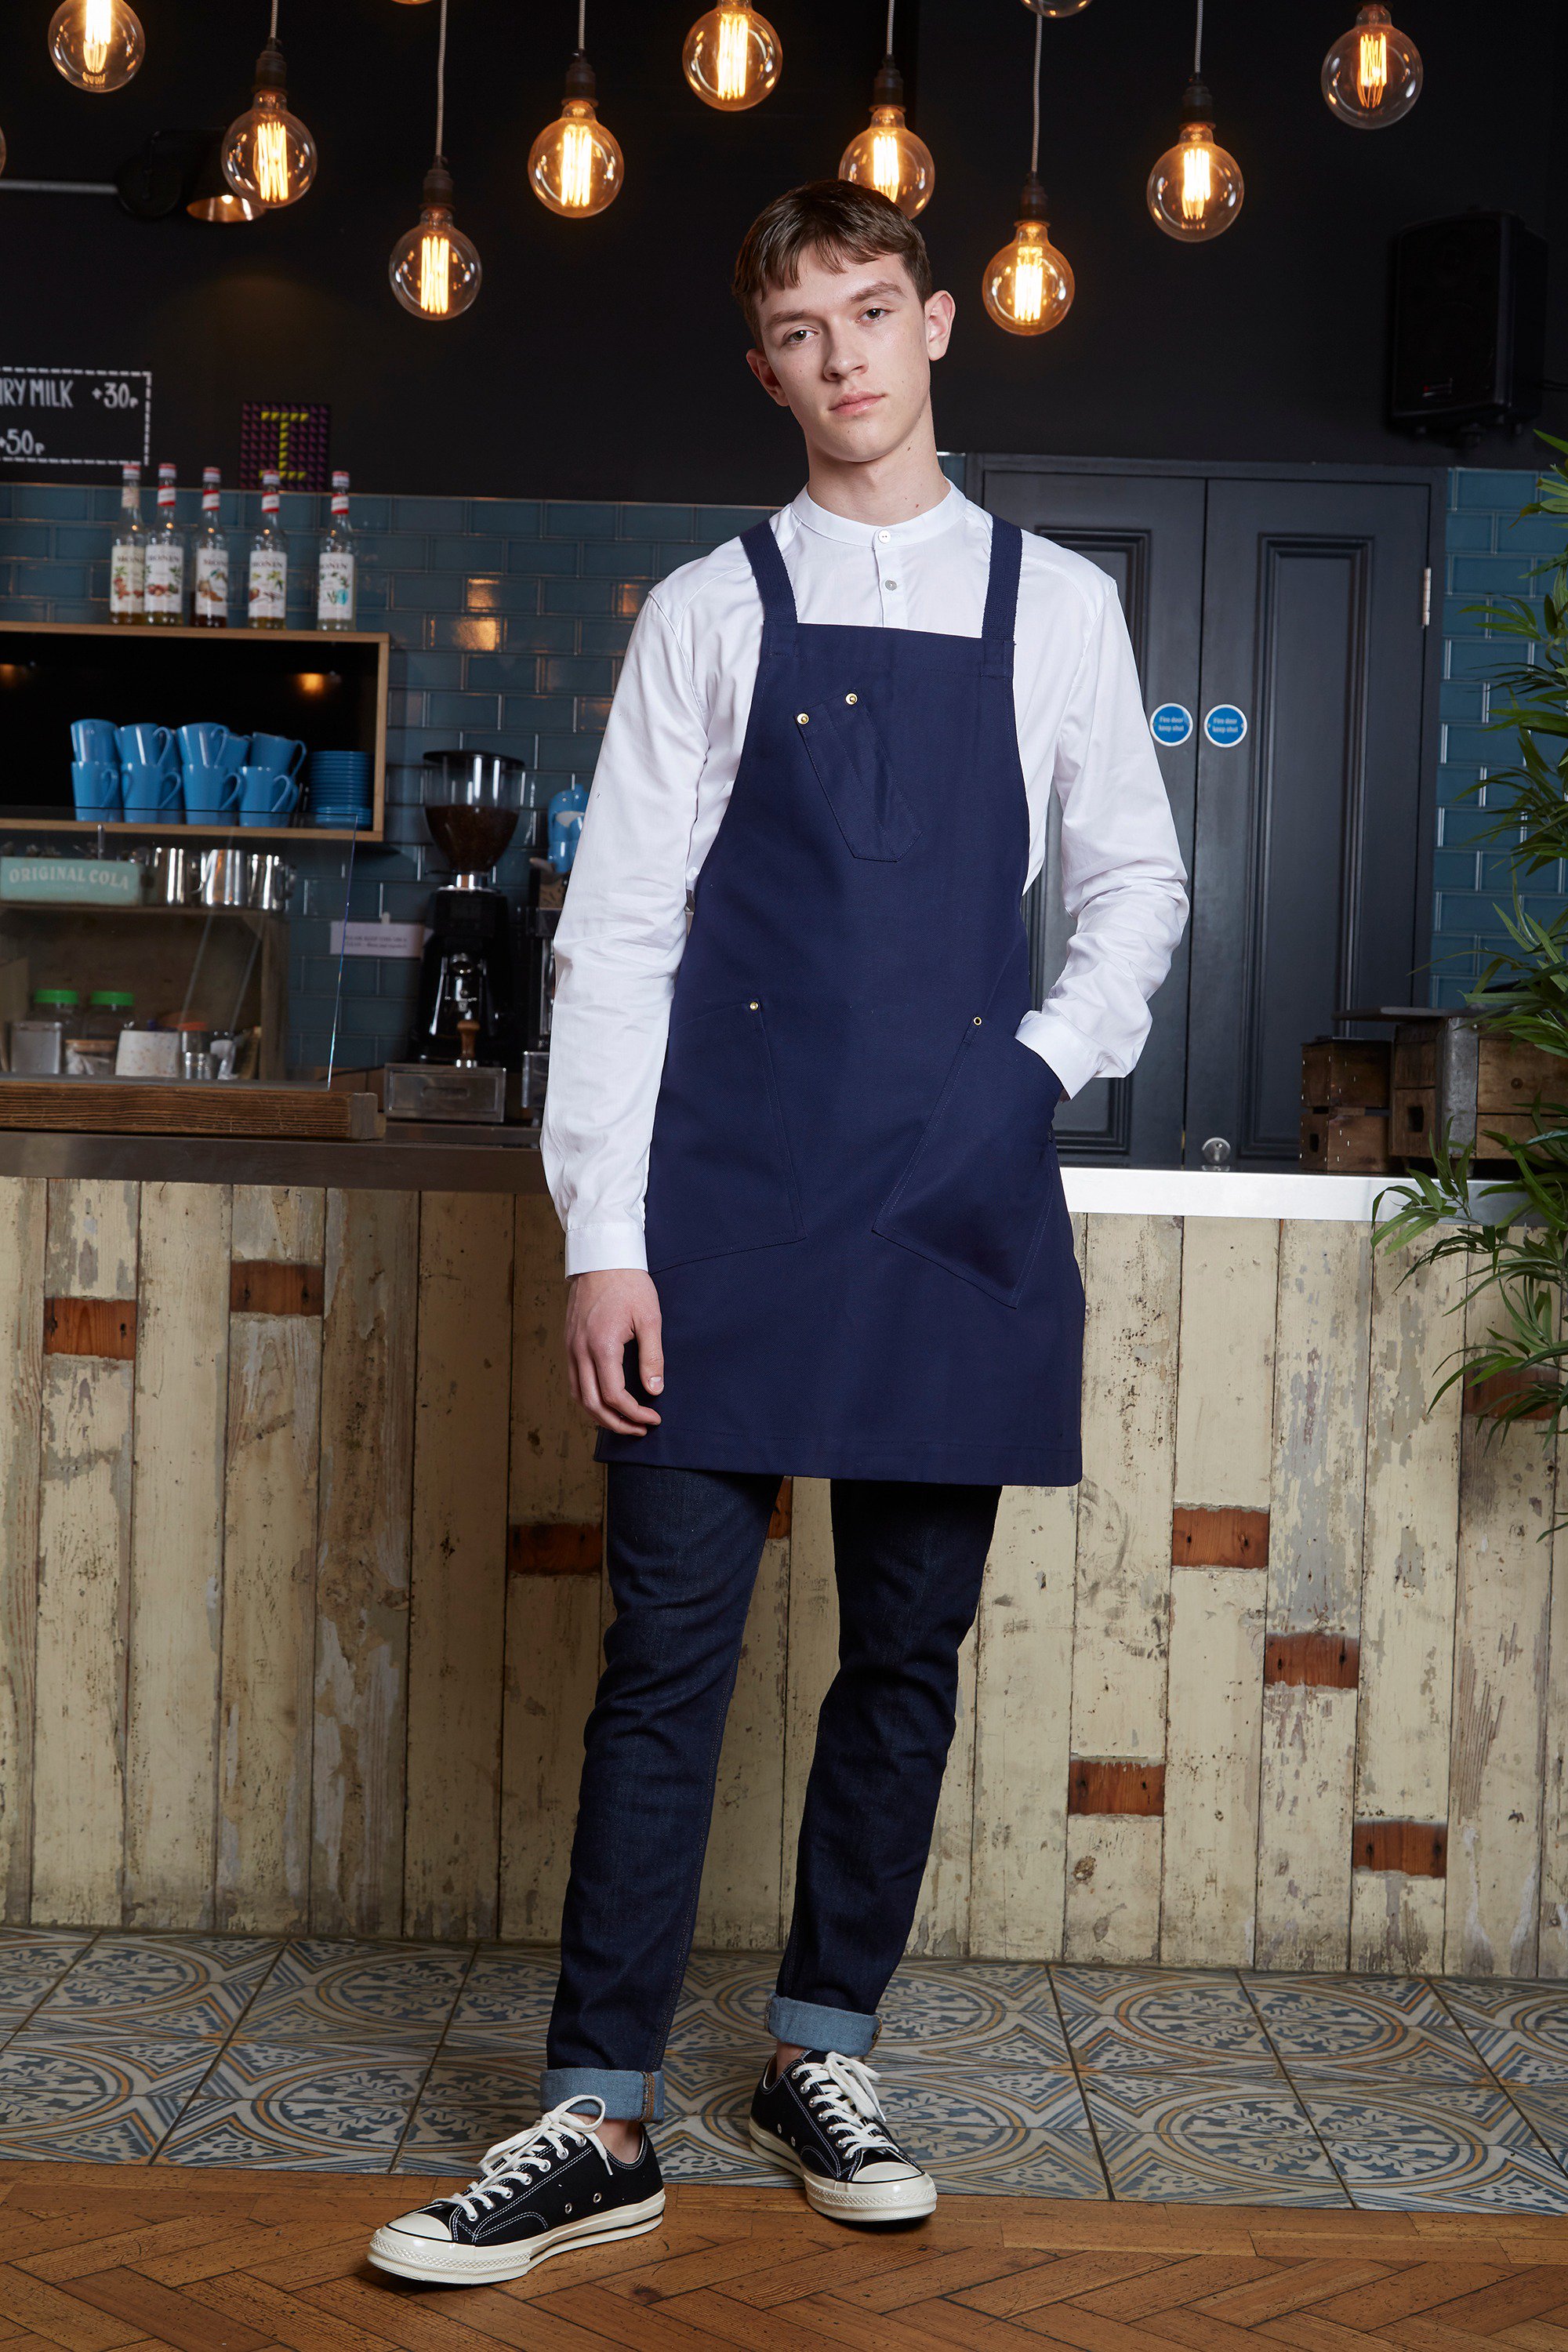 The Uniform Studio on Twitter: barista favourite, Bib style apron in Marine is both beautiful and hard-wearing #uniforms #aprons #barista #coffeeculture #cafes #workwear #workstyle #coffeeshops https://t.co/UUVPXS3ilN" / Twitter